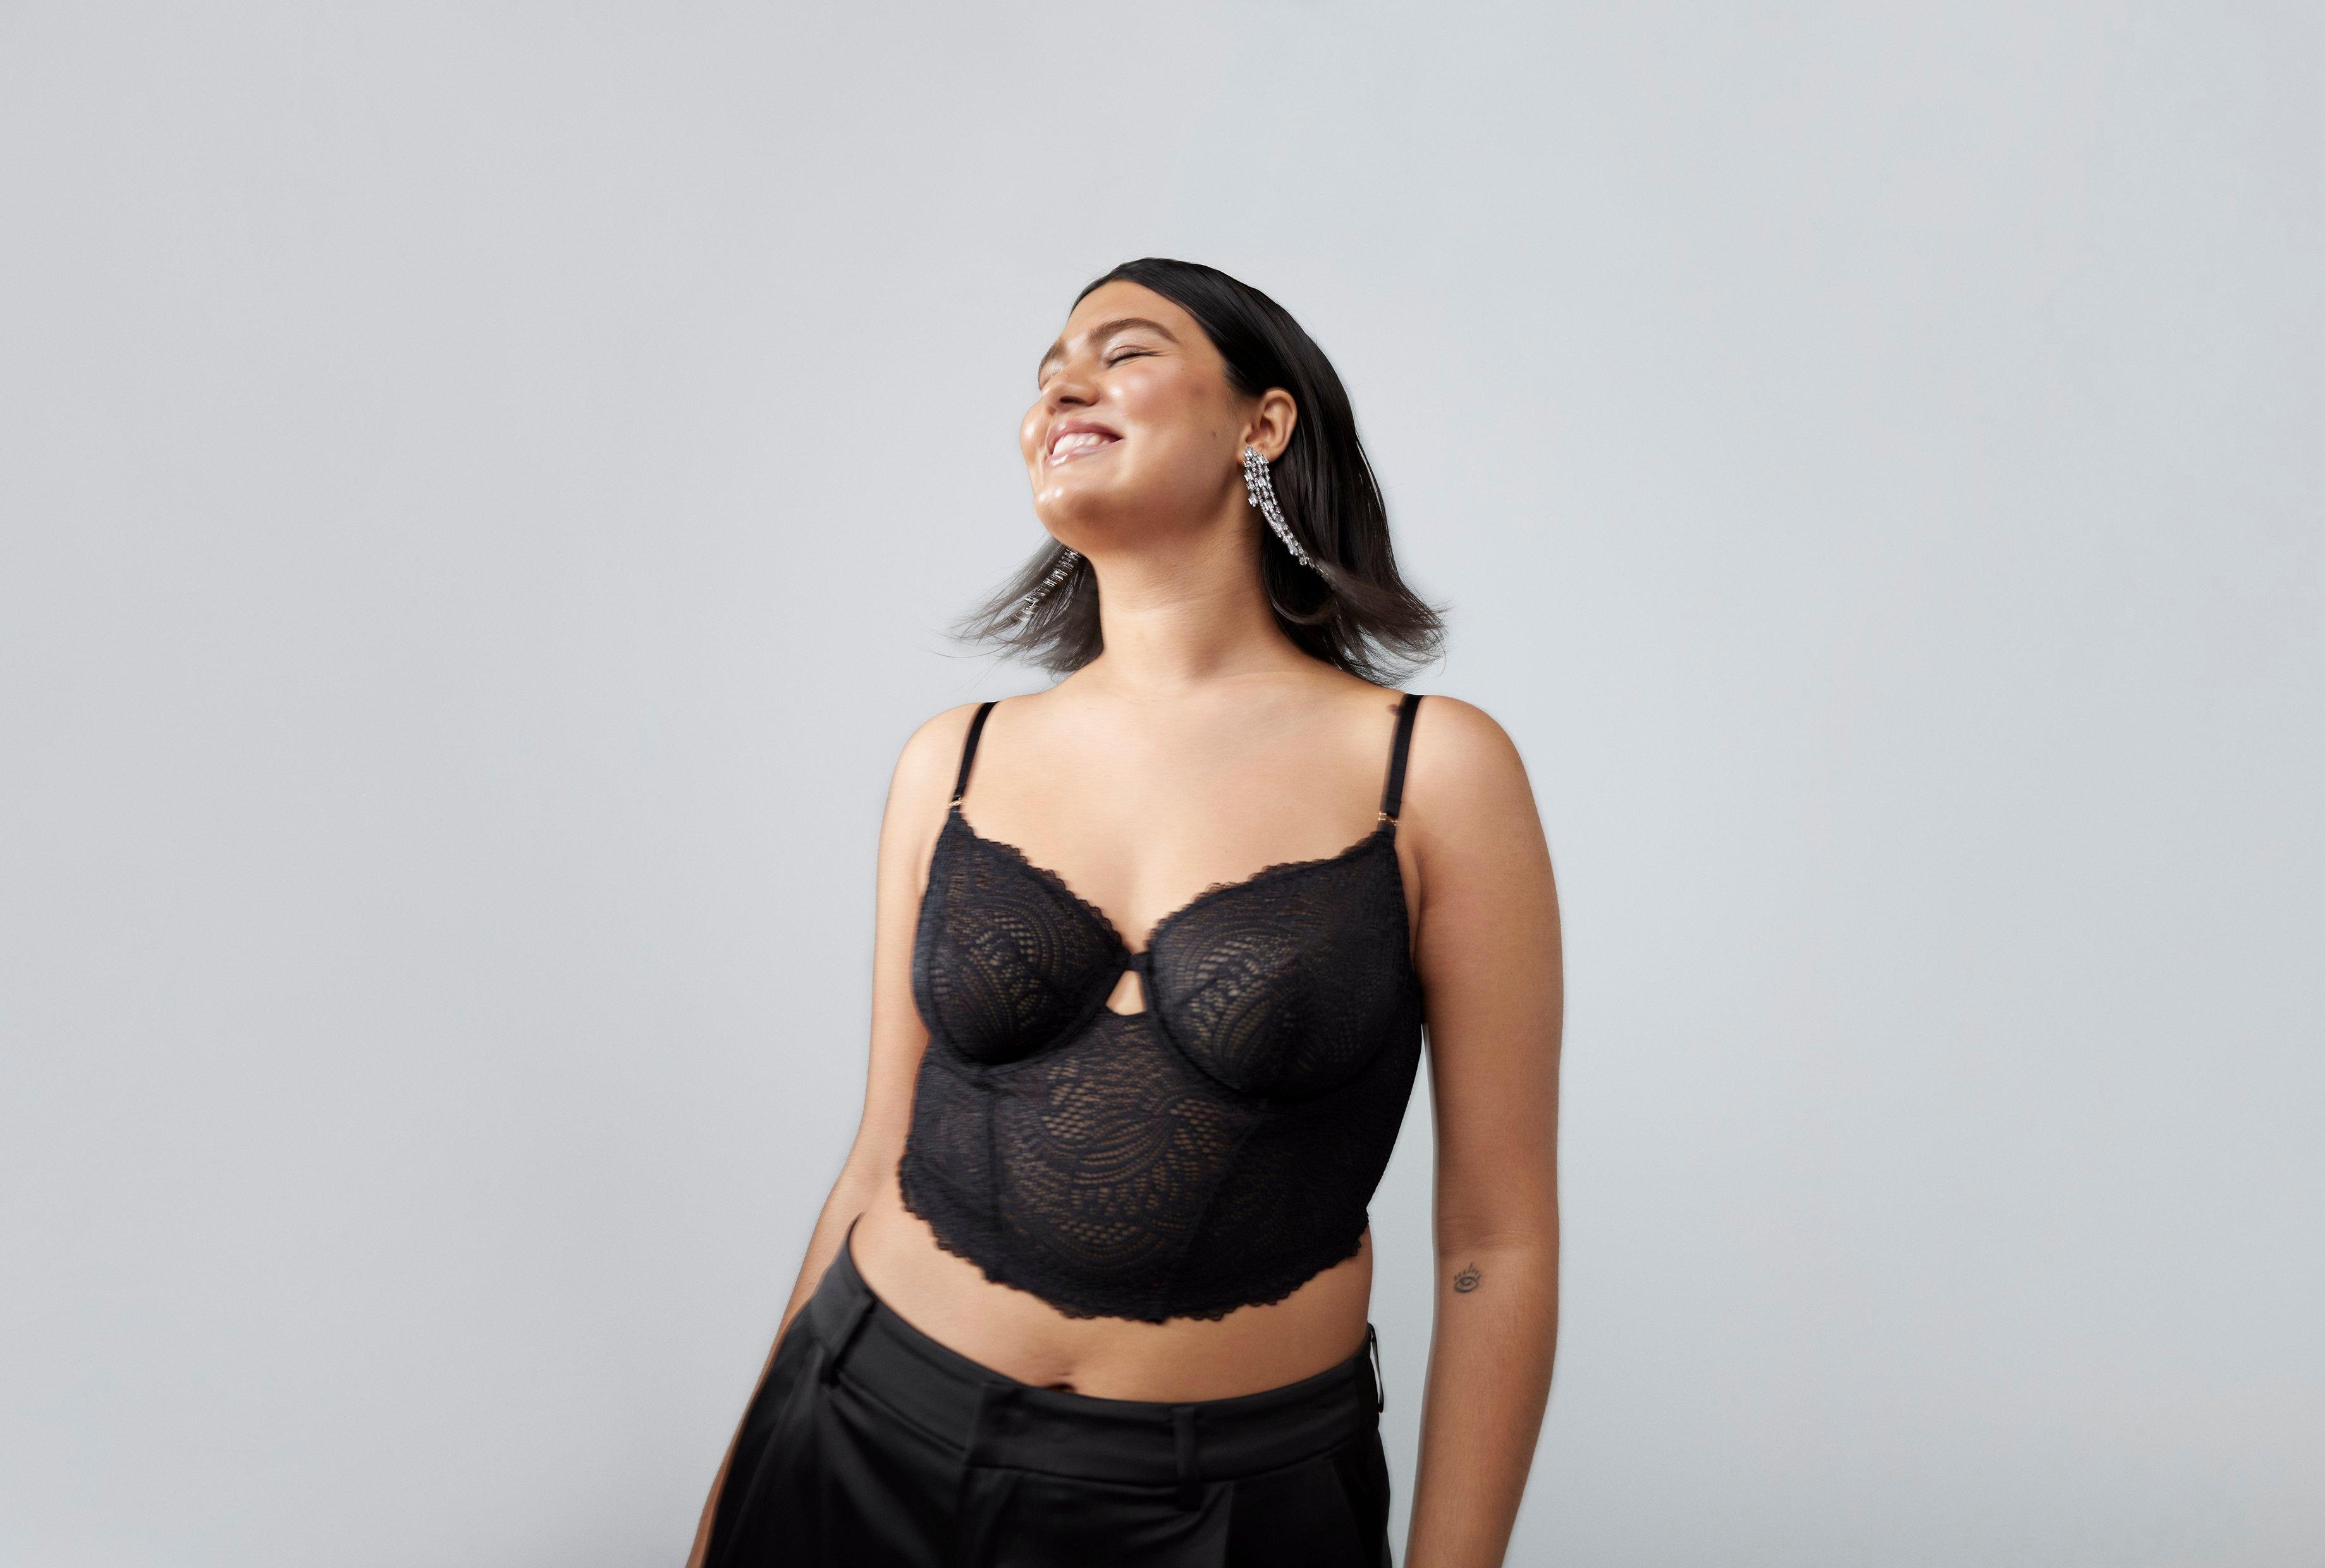 Lindex Malta - A super comfy, sleek unpadded bralette with a seamless  design, v-neck and ribbed texture. Available in store or online. https:// lindex.mt/product/lingerie/bras/seamless/seamless-ribbed-soft-bra/